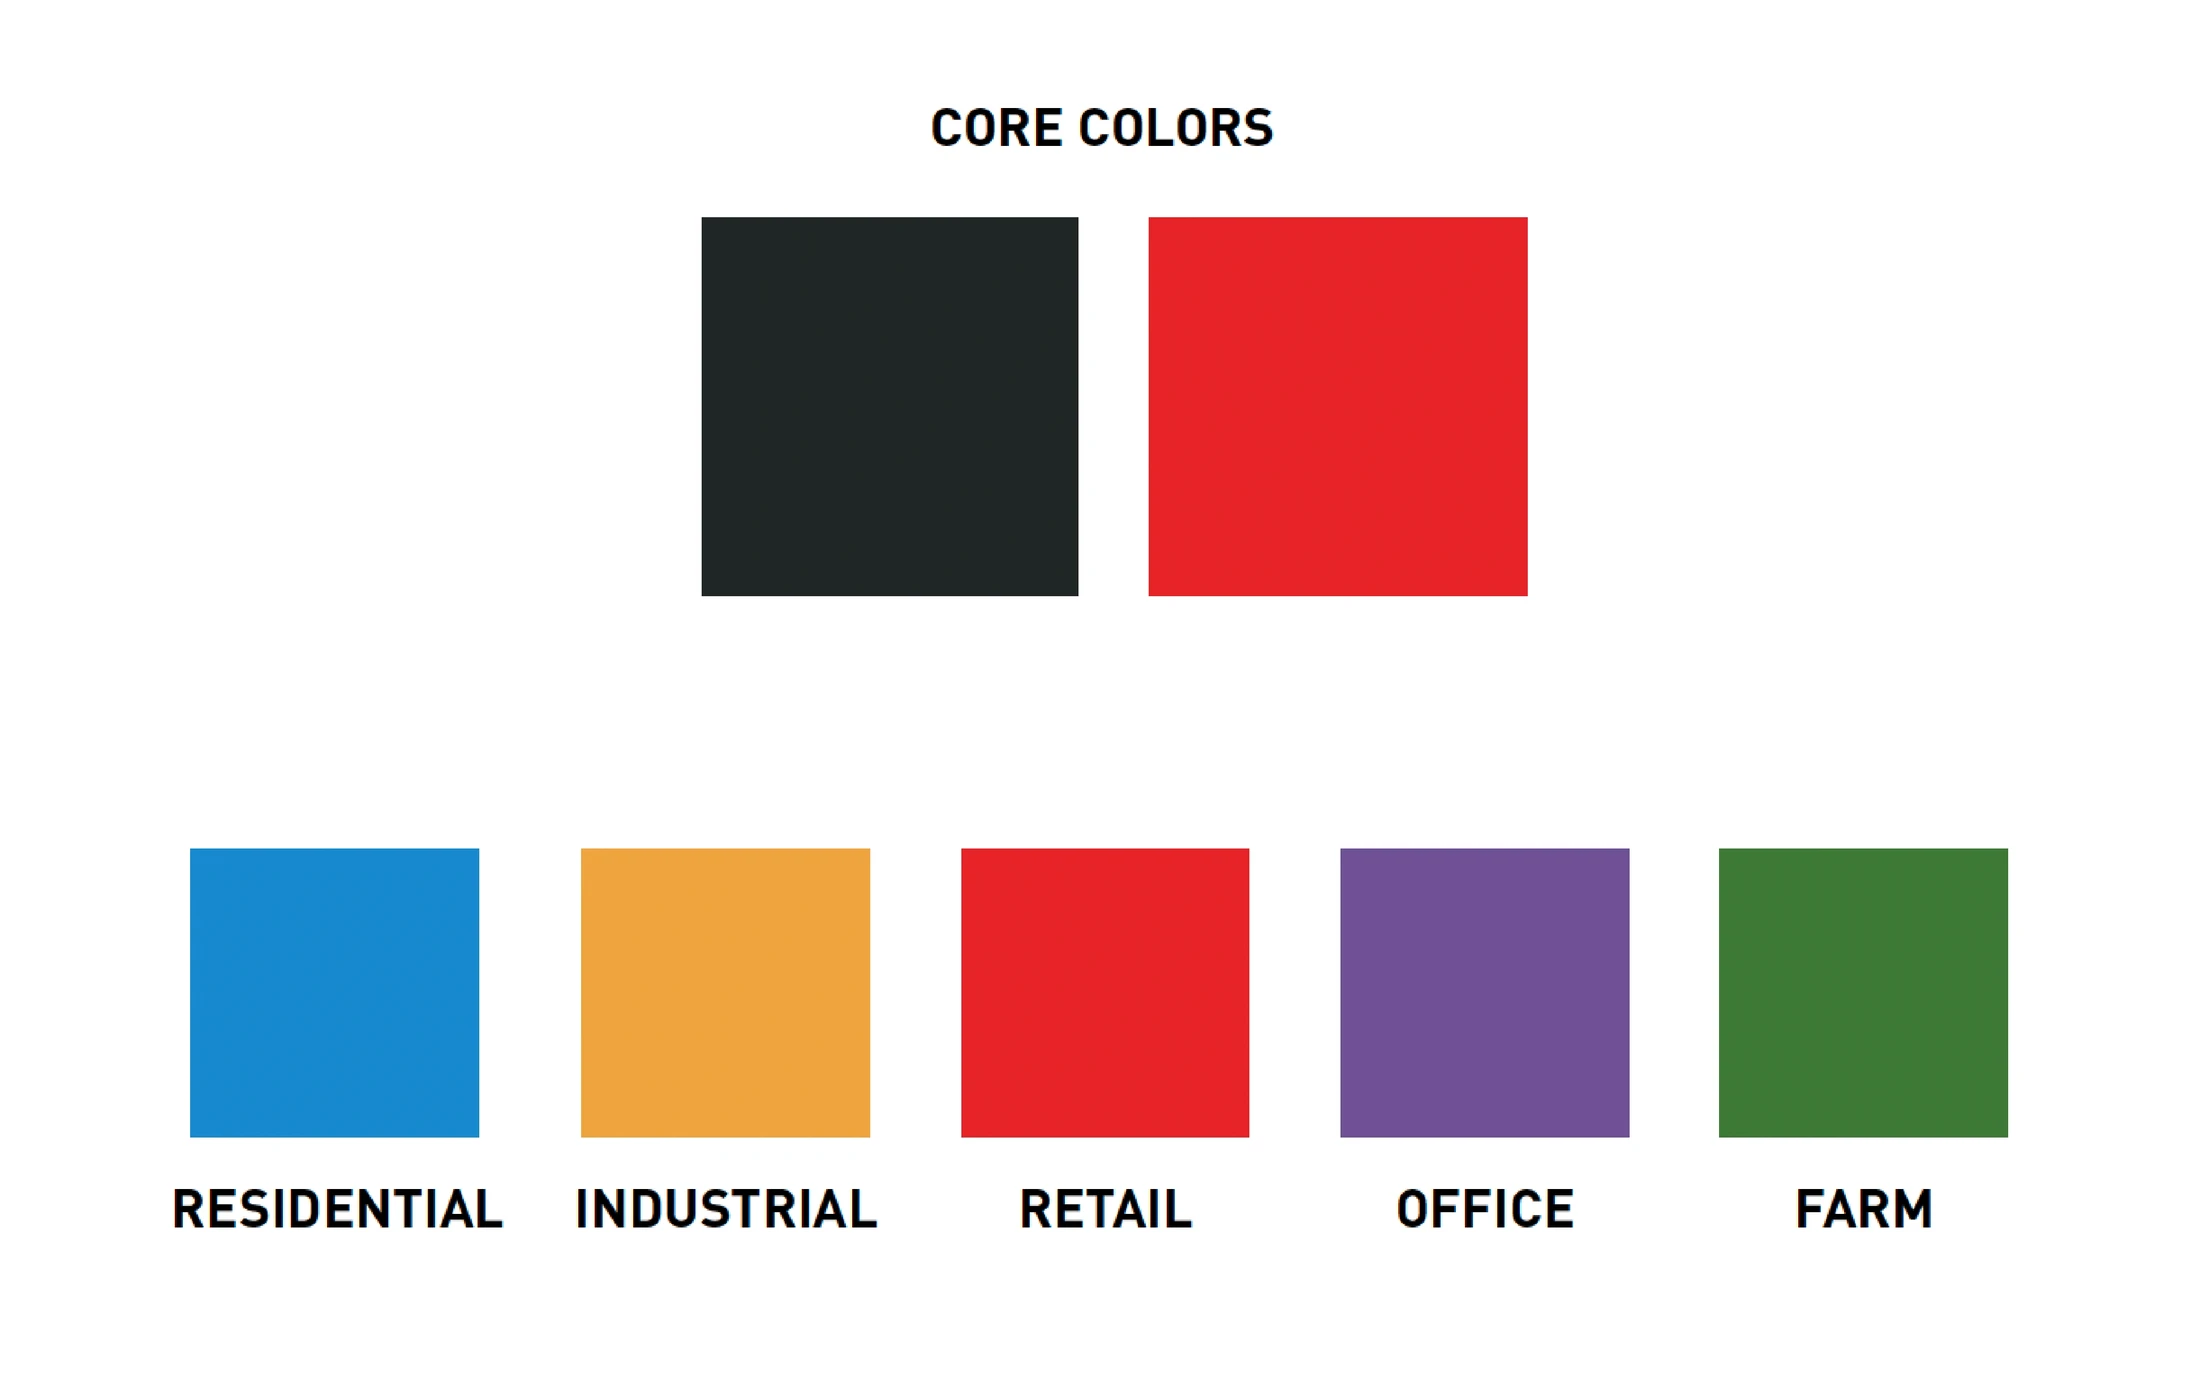 A color chart with different colors of the core colors.